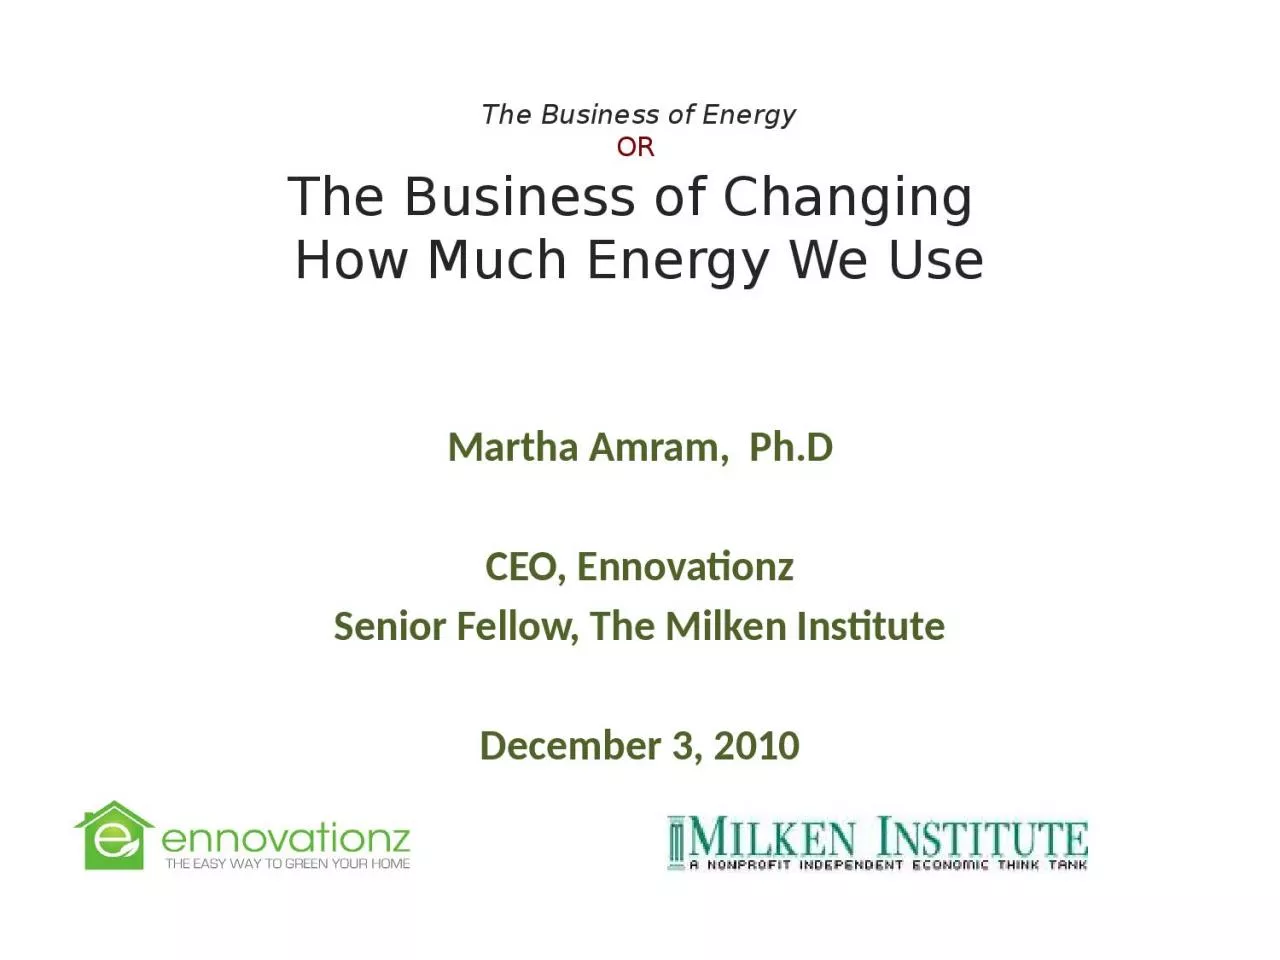 The Business of Energy OR